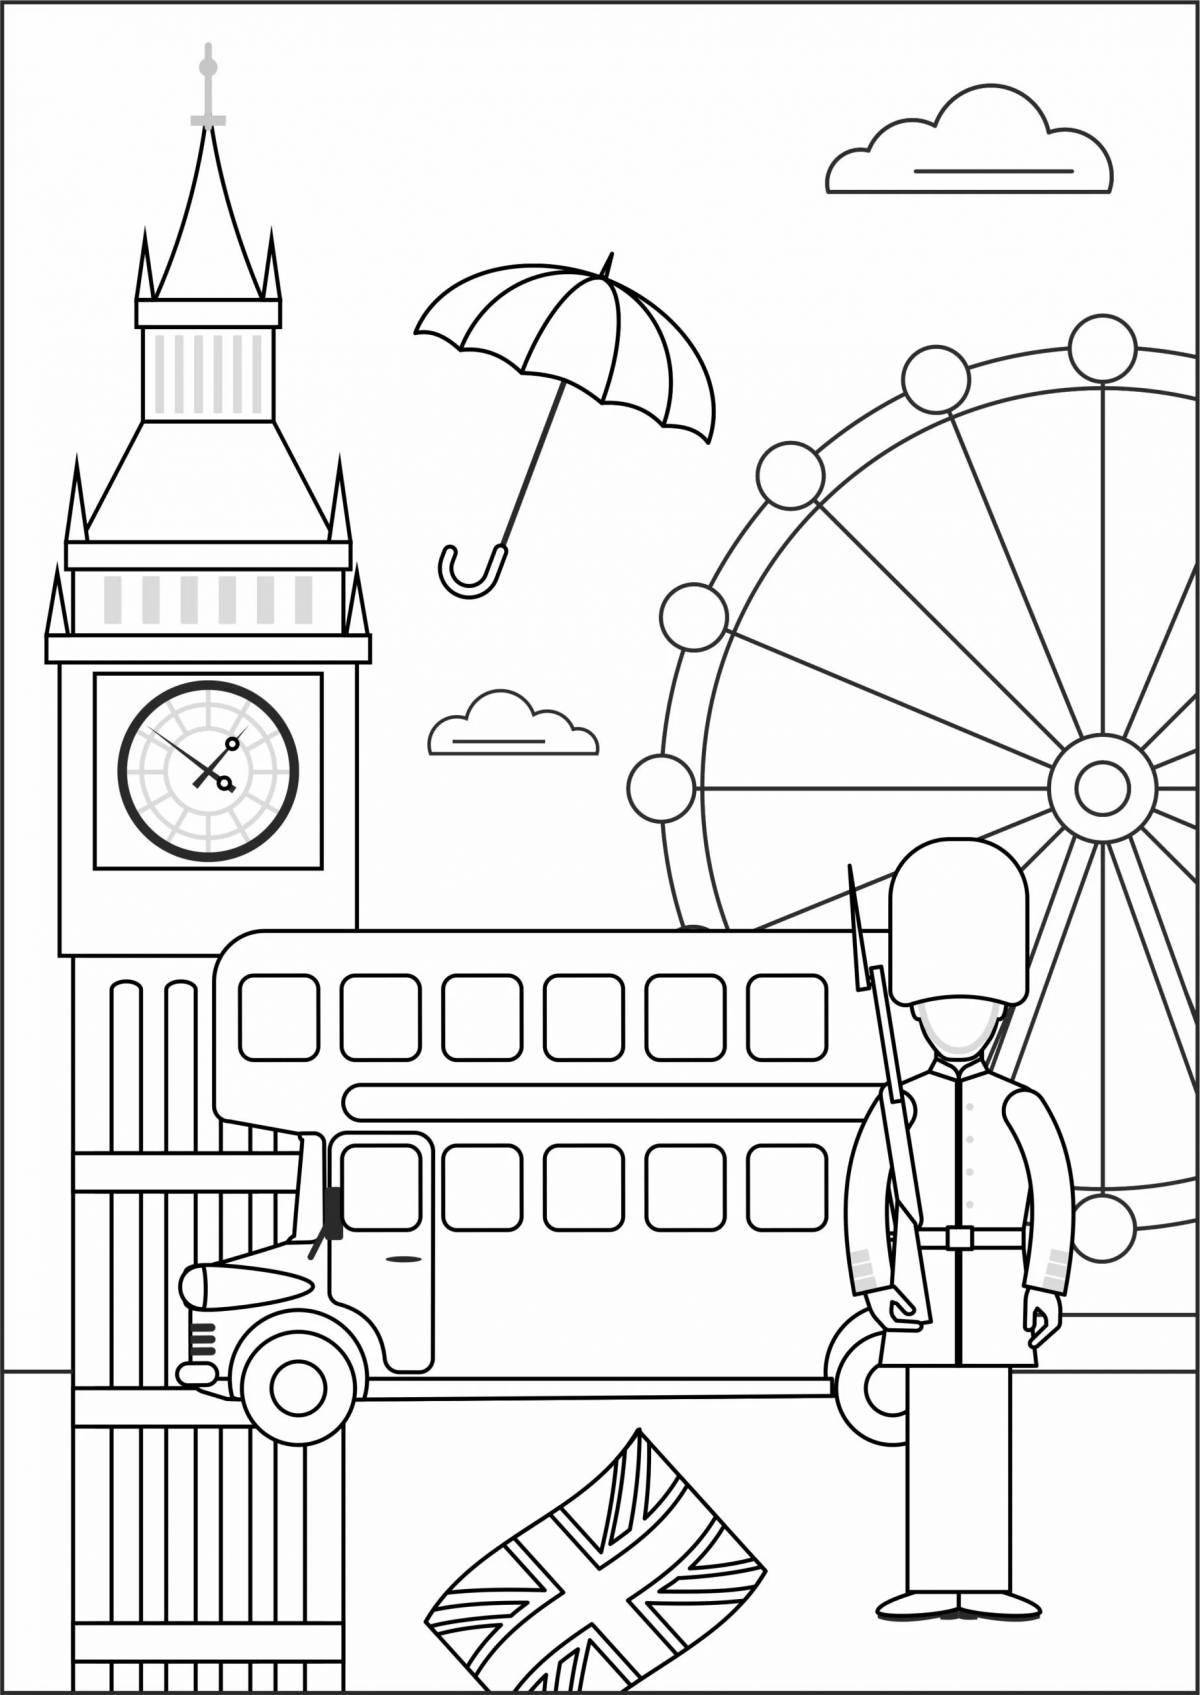 Coloring pages of nice london for kids